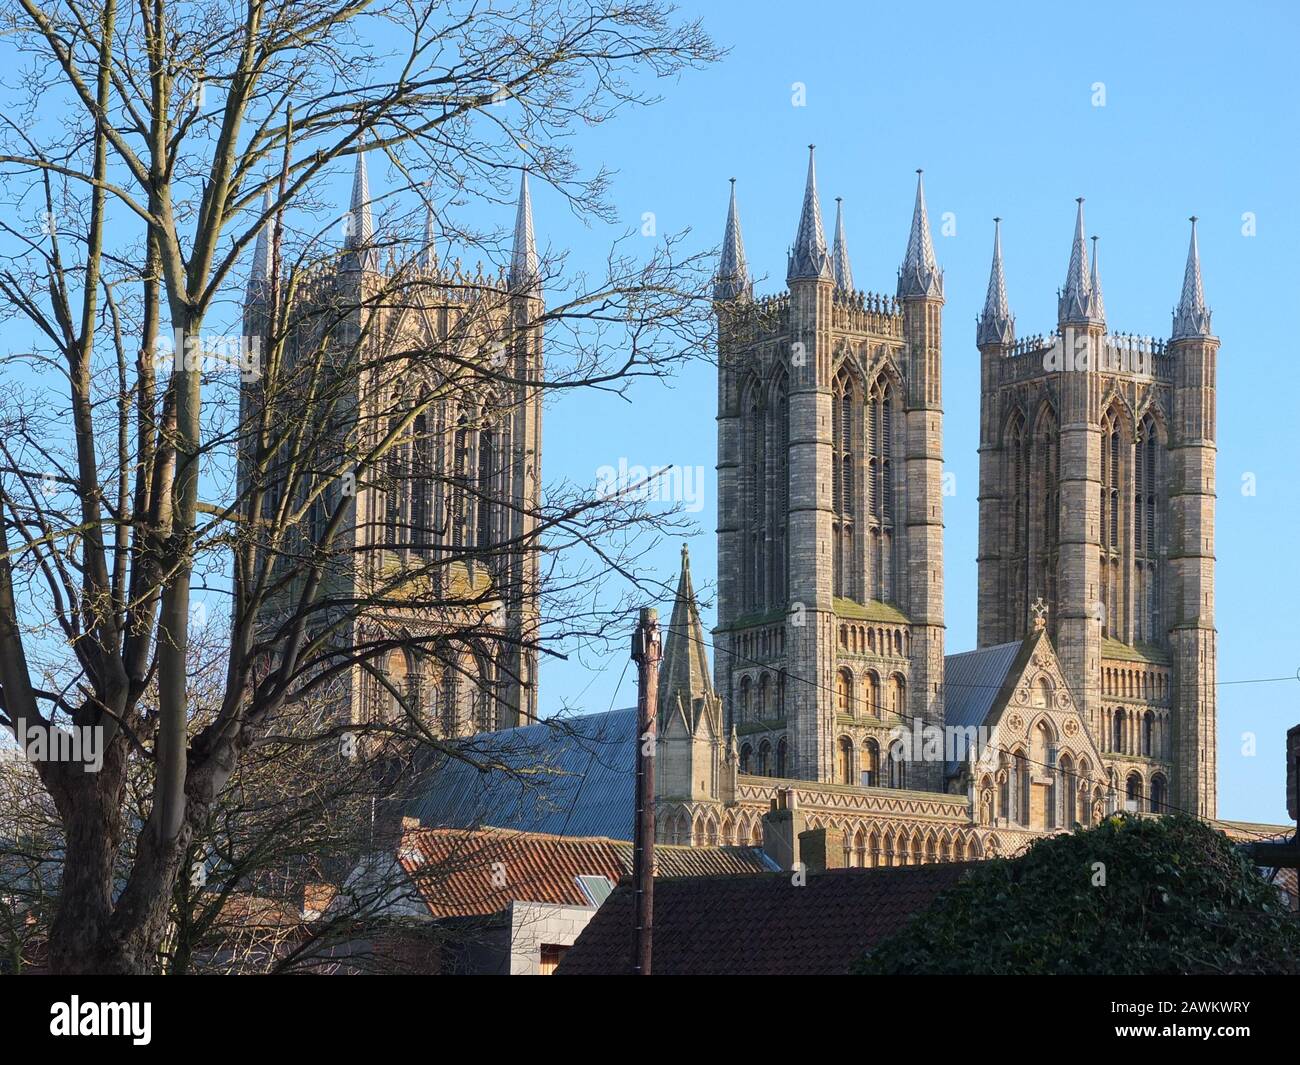 Looking across to the towers of Lincoln Cathedral on a bright sunny February winters day with a bare tree in the foreground Stock Photo